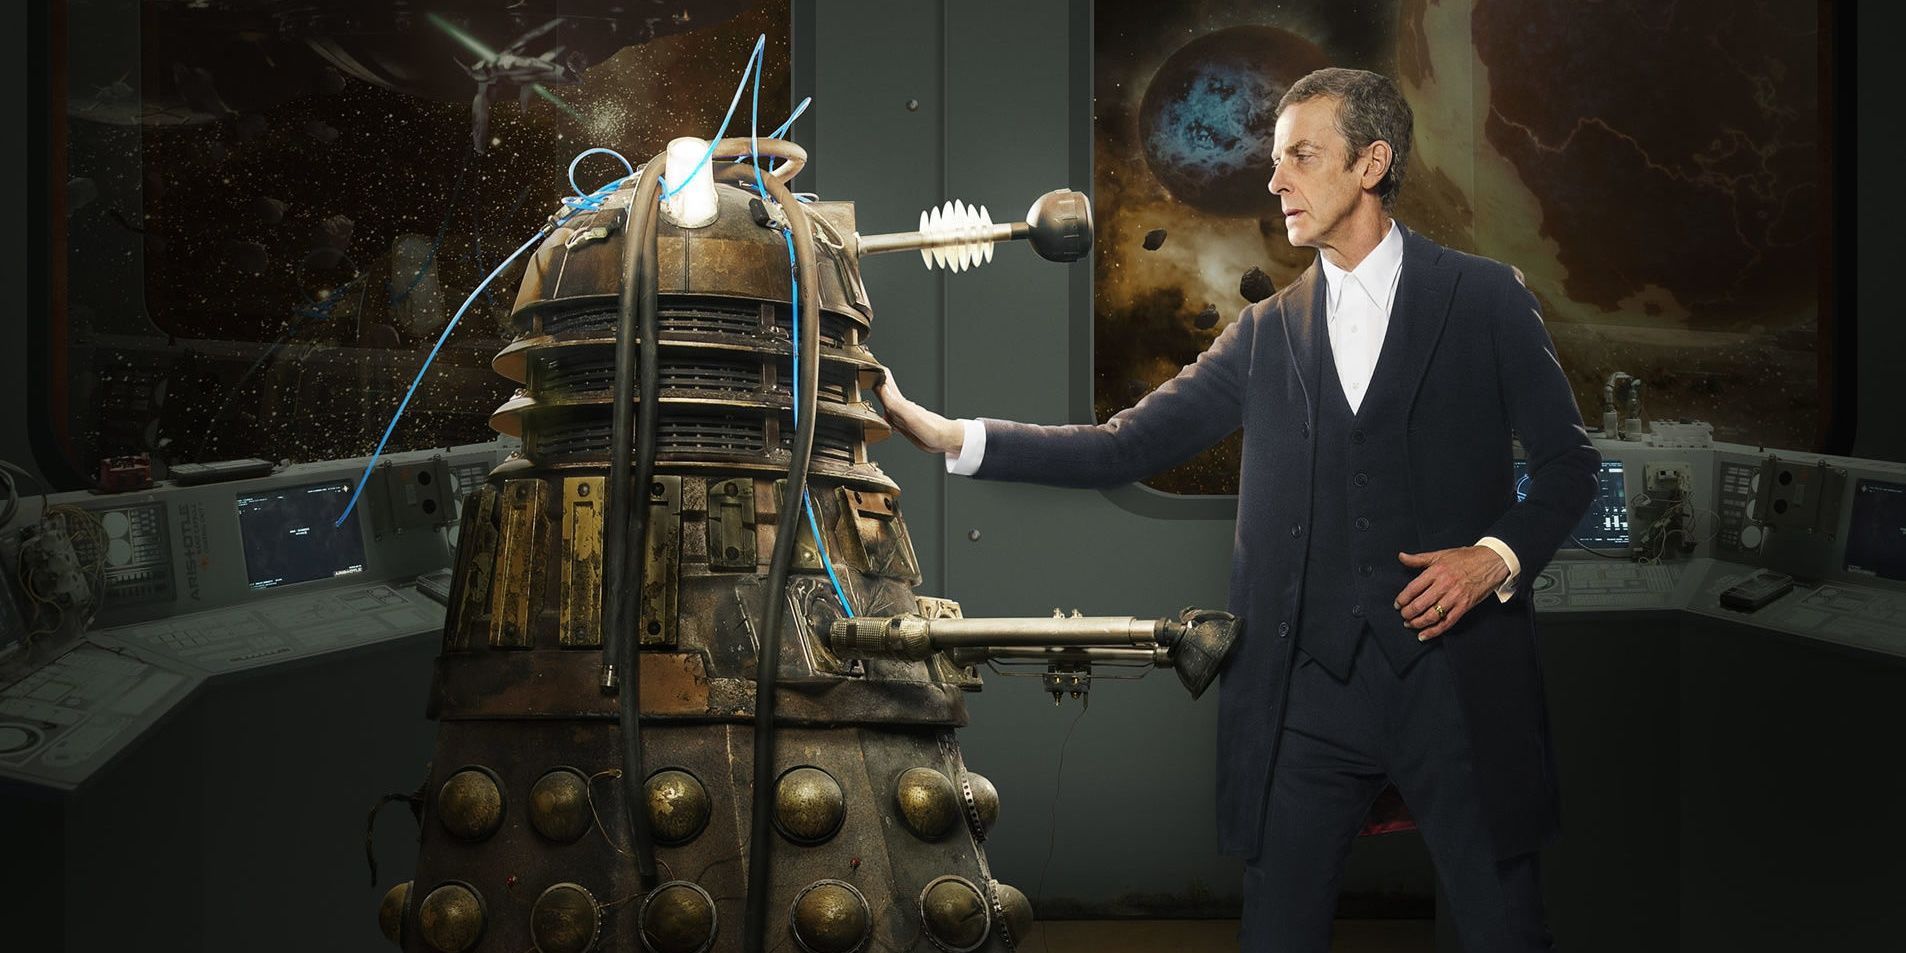 The Twelfth Doctor meets Rusty The Dalek.